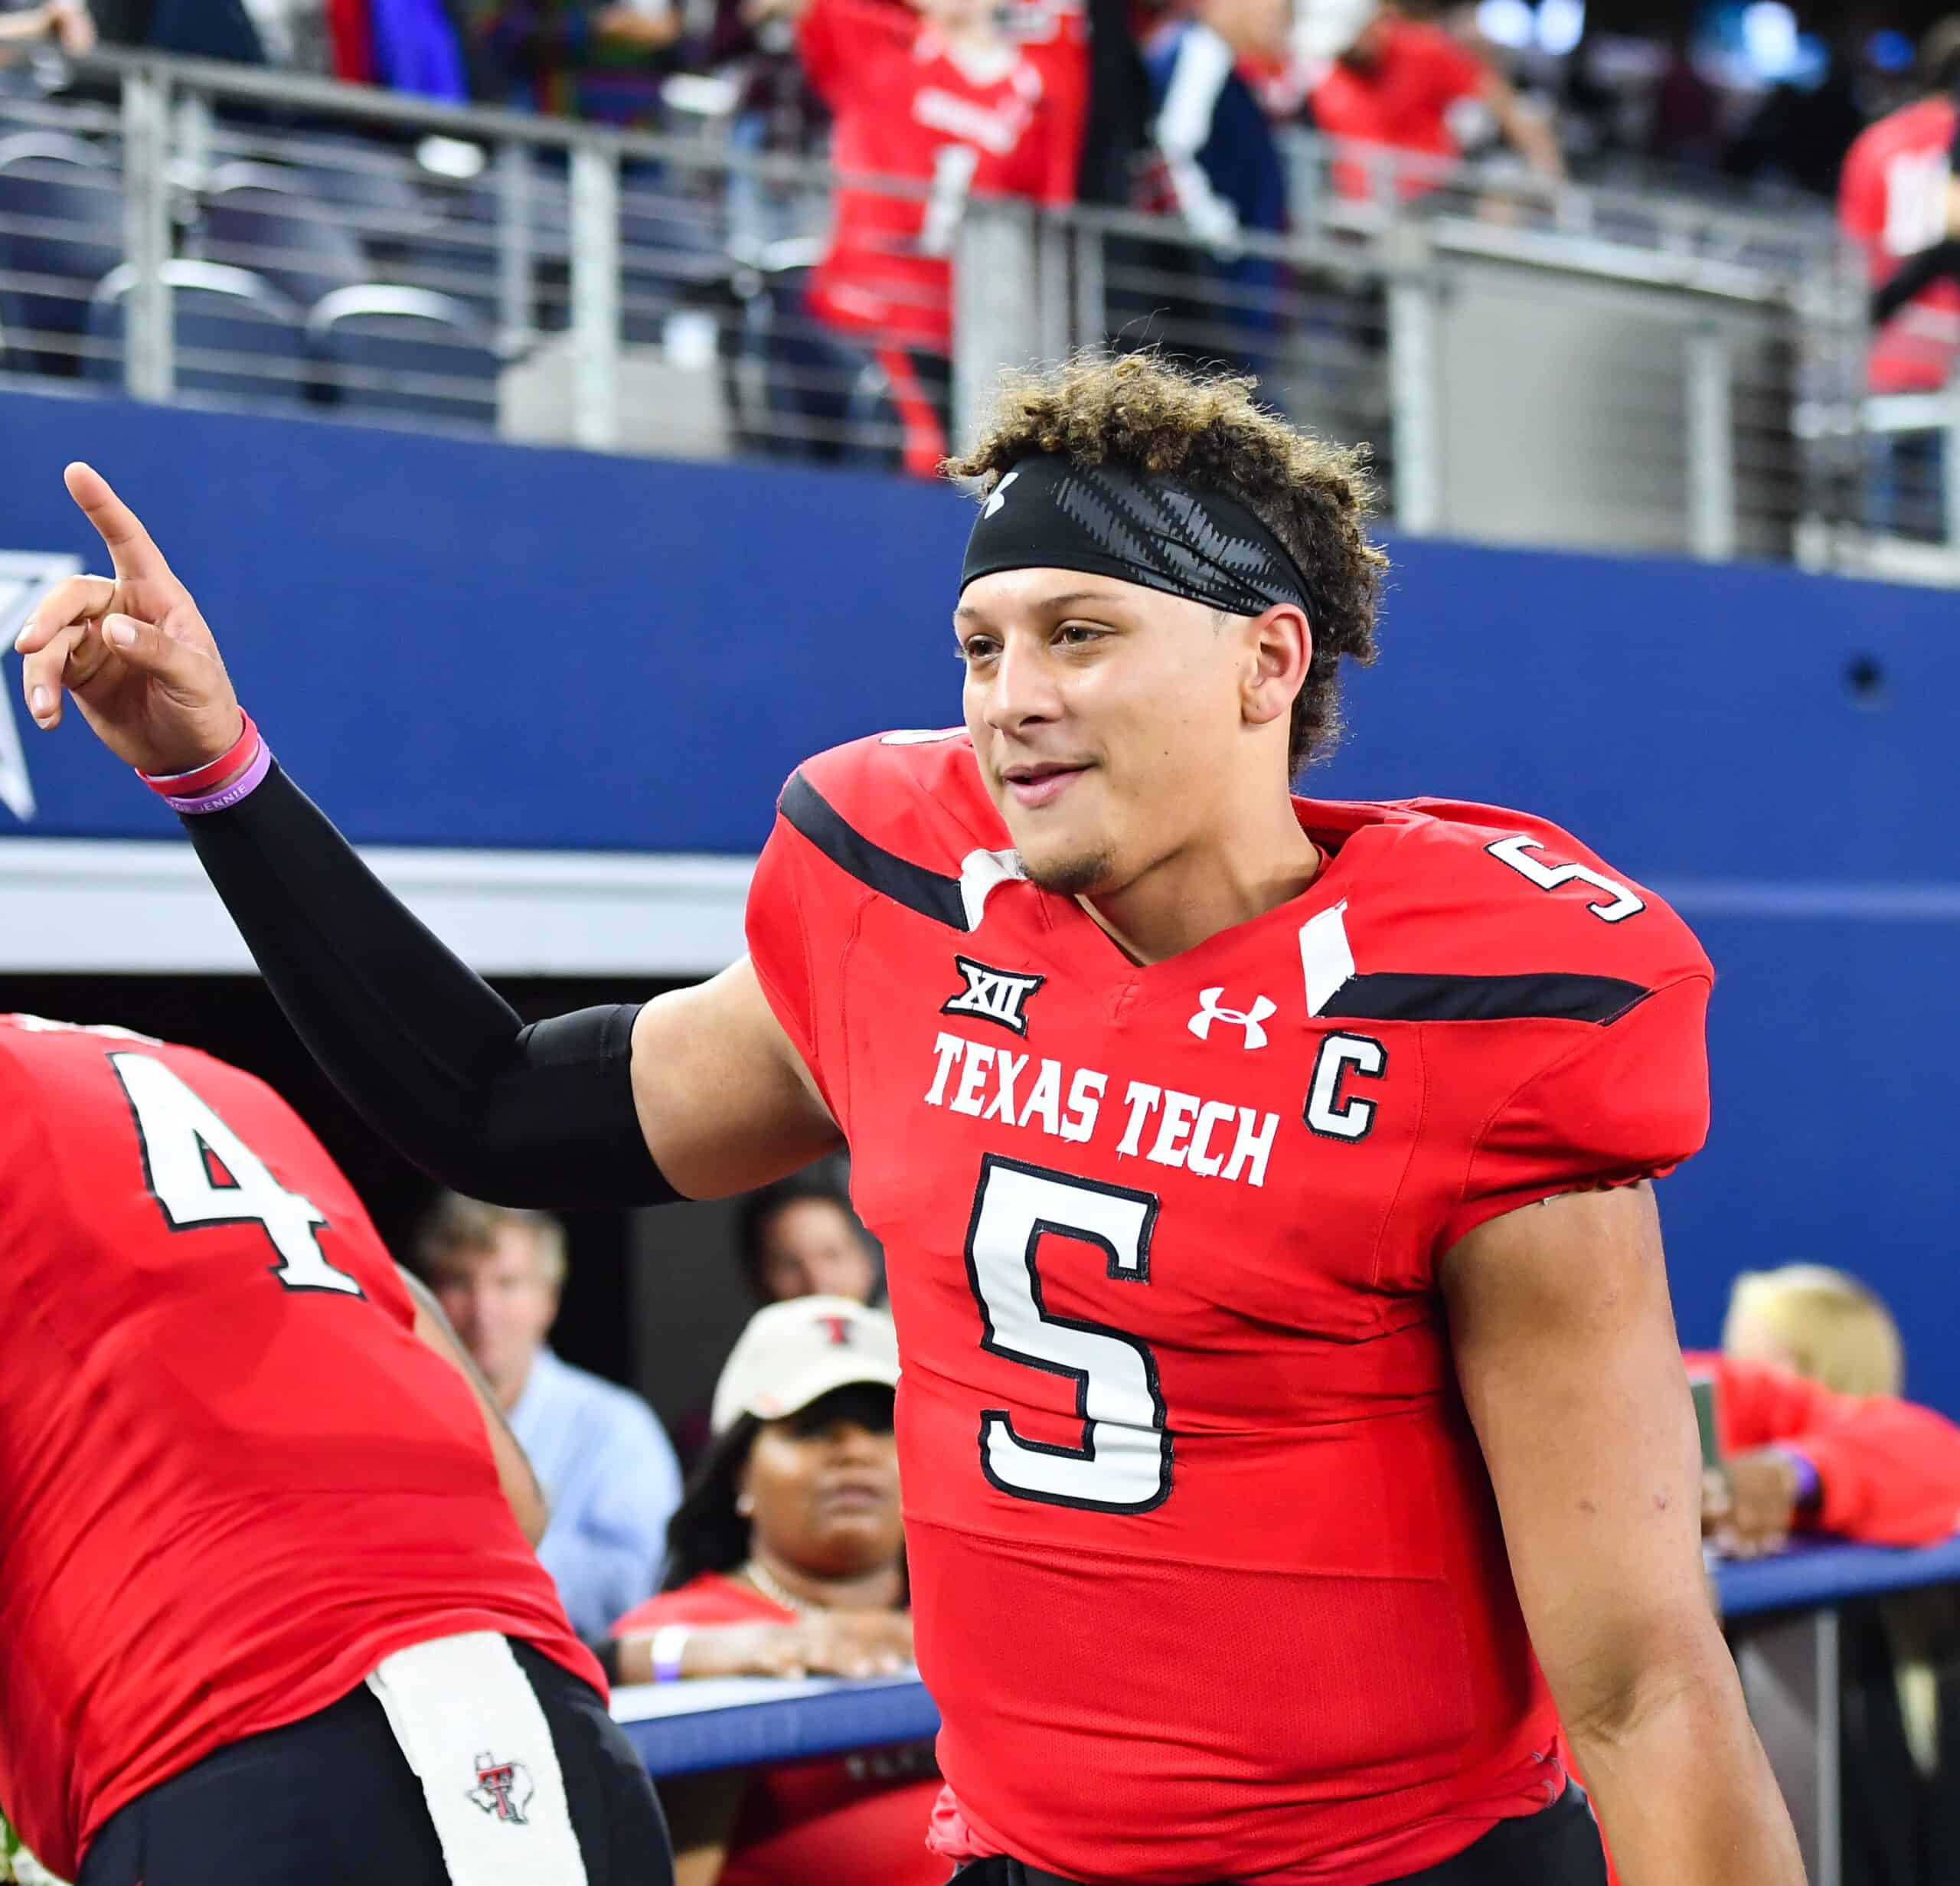 ARLINGTON, TX - NOVEMBER 25: Patrick Mahomes II #5 of the Texas Tech Red Raiders interacts with fans after the game against the Baylor Bears on November 25, 2016 at AT&amp;T Stadium in Arlington, Texas. Texas Tech defeated Baylor 54-35. (Photo by John Weast/Getty Images)